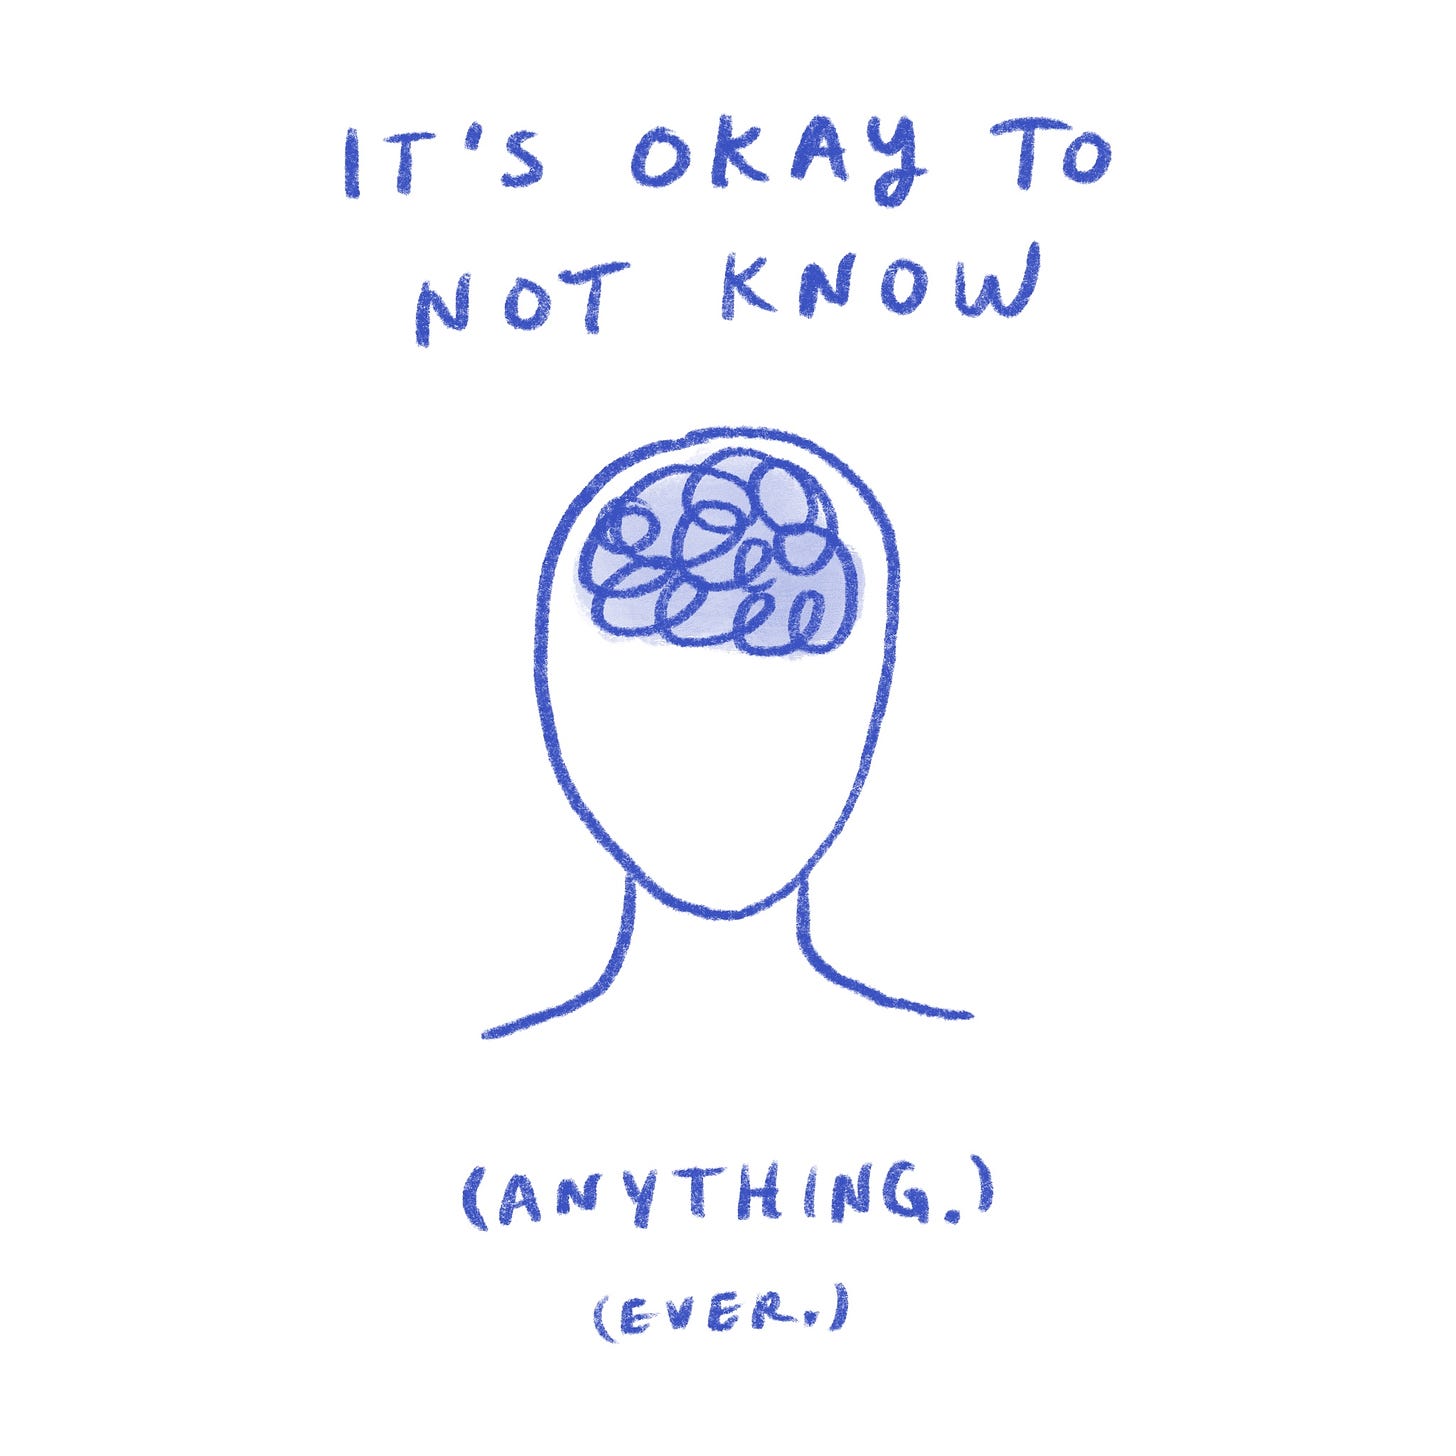 It's okay to not know (anything. ever.)